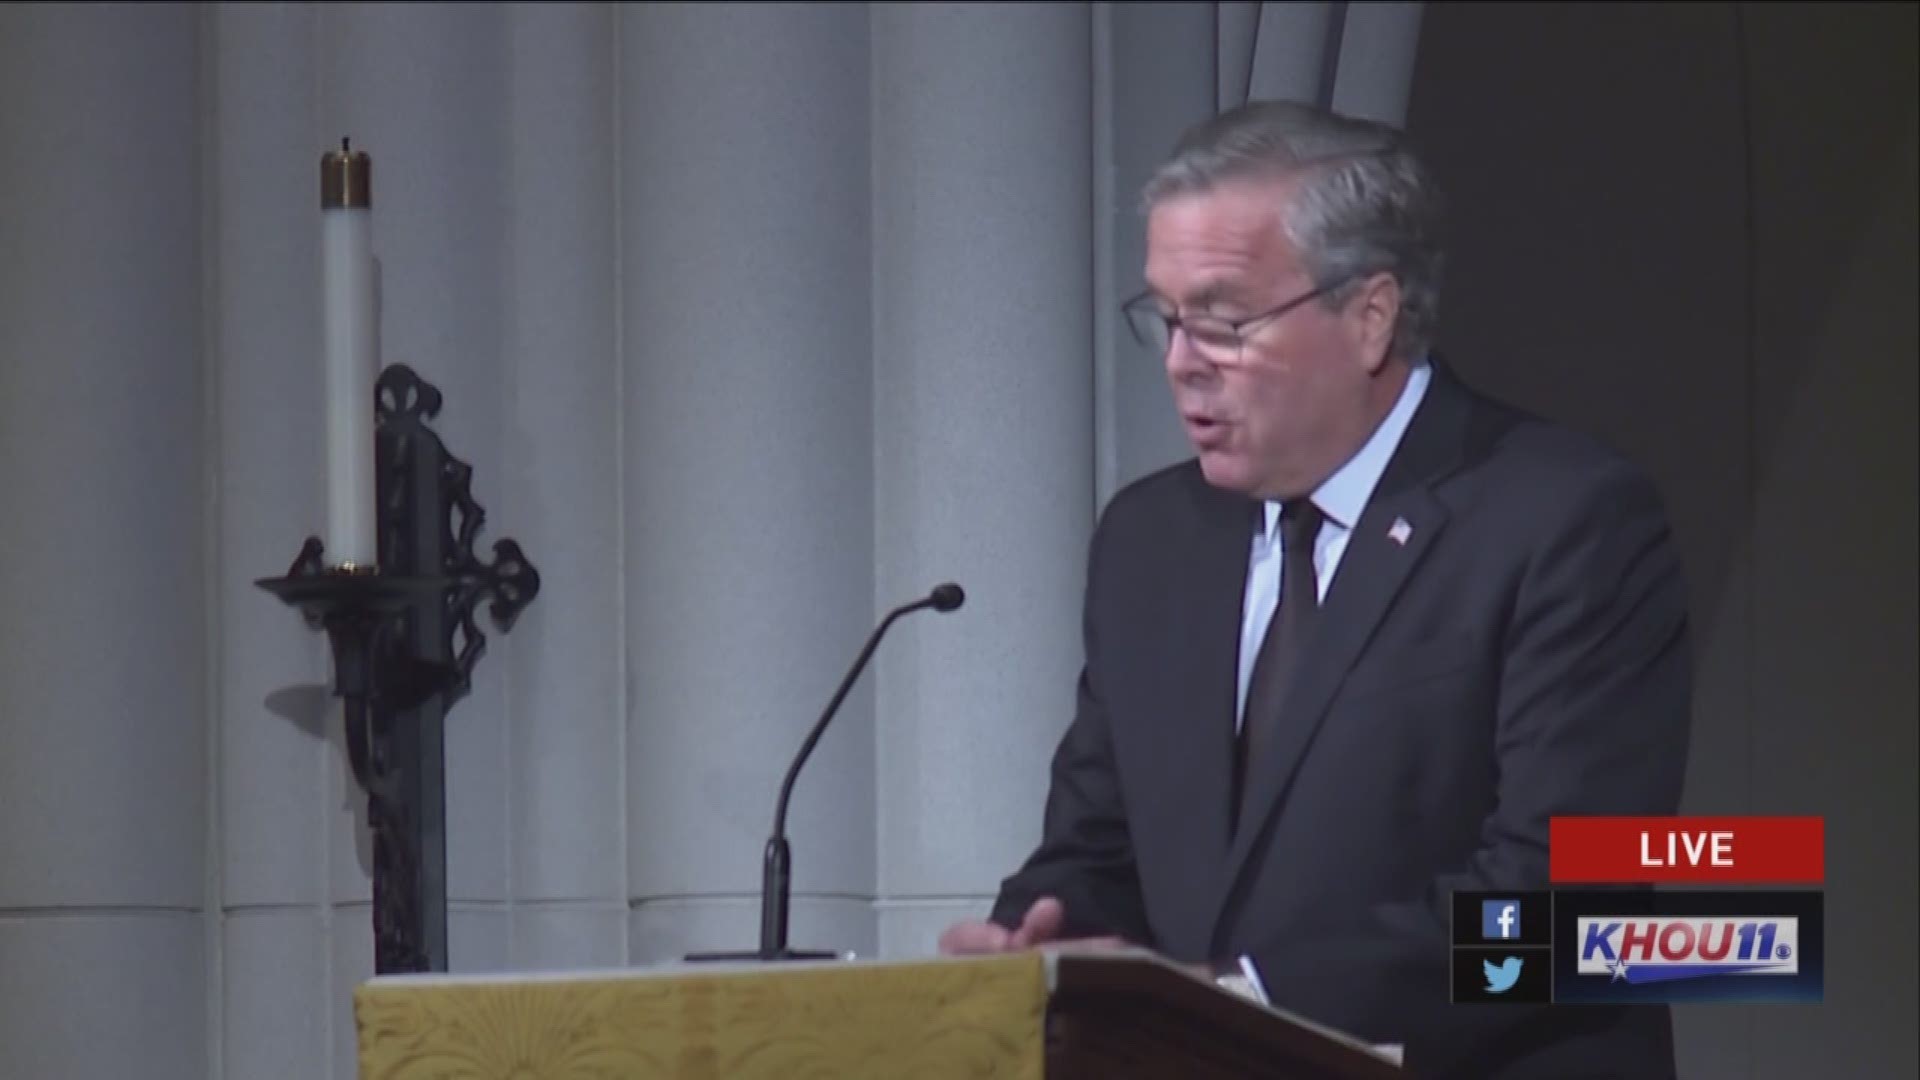 Son and former Florida Governor Jeb Bush shares personal memories and funny stories about Barbara Bush at her funeral in Houston.